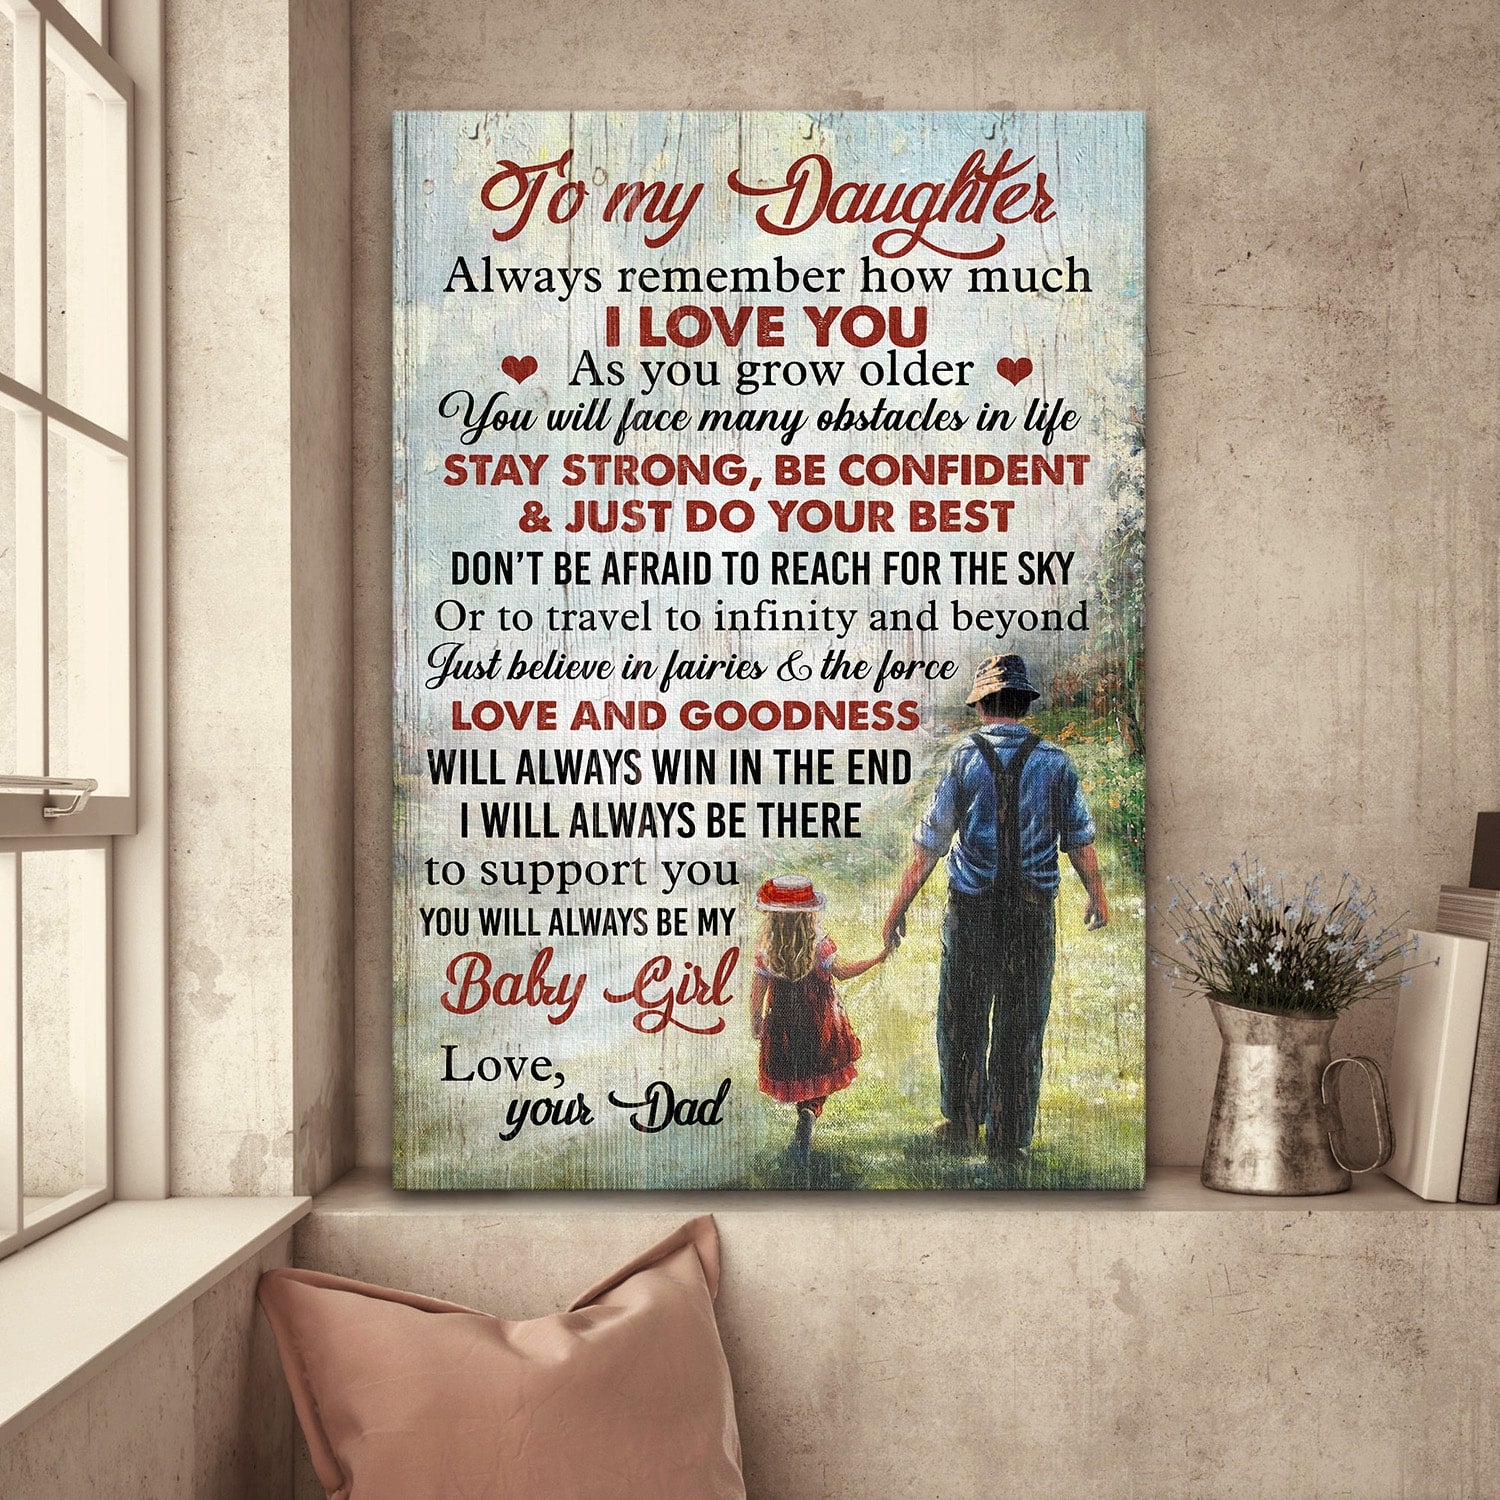 Dad to daughter, Walking on Grassland, You will always be my daughter - Family Portrait Canvas Prints, Wall Art